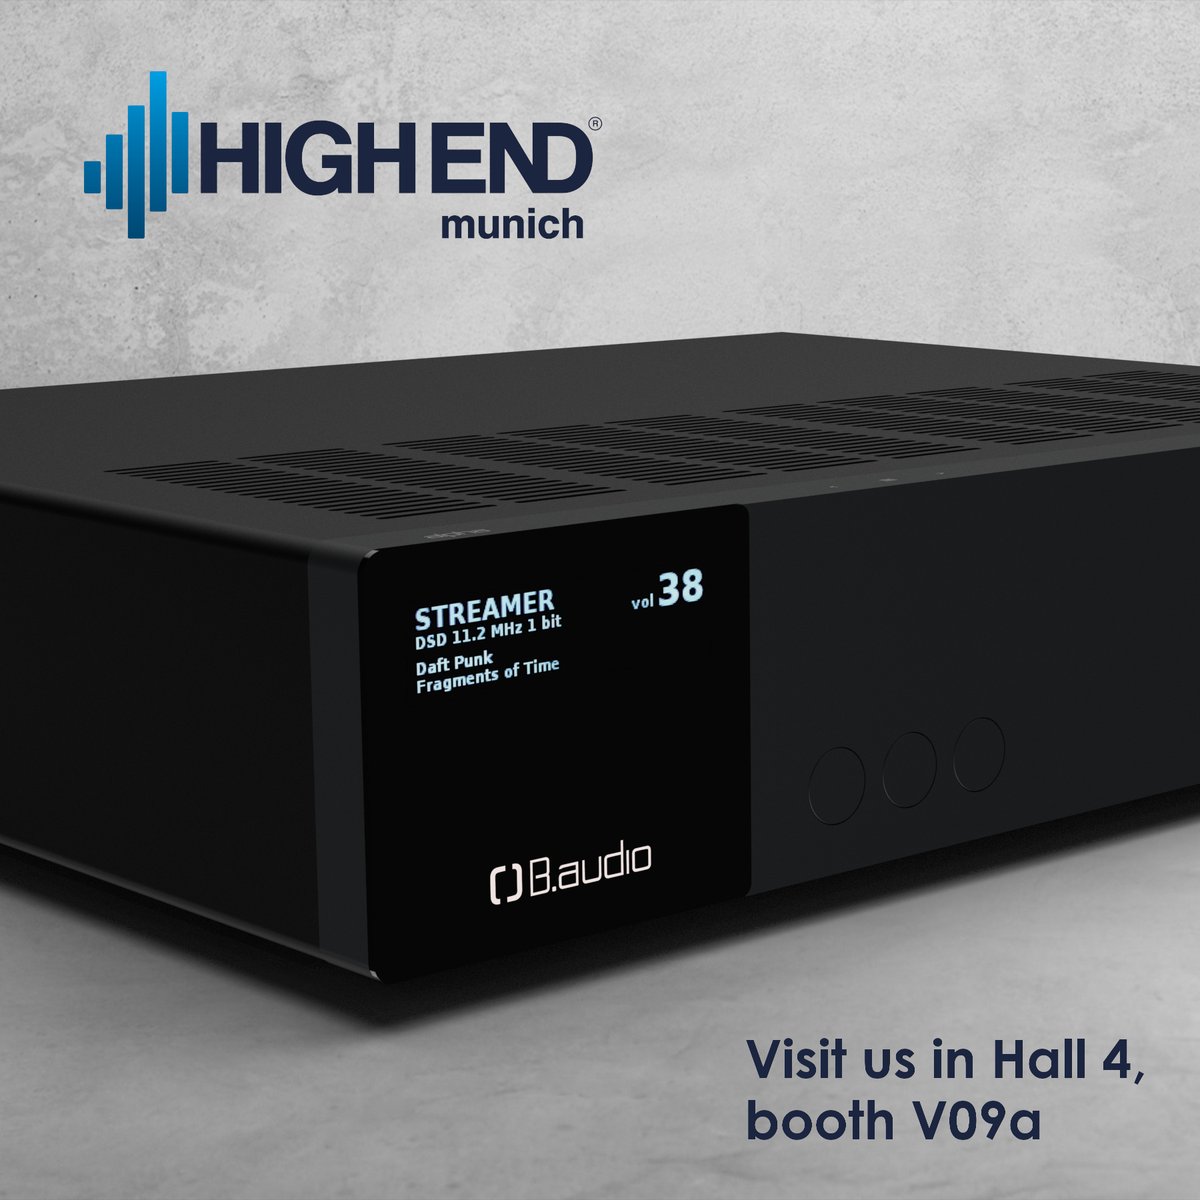 #HighEndMunich is just around the corner!
We will be showcasing our latest developments in Hall 4 - booth V09a
We look forward to welcoming you there!
#audioamplifier #dac #streamingmusic #hifi #highendaudio #madeinfrance #musiclovers  #engineeringmatters